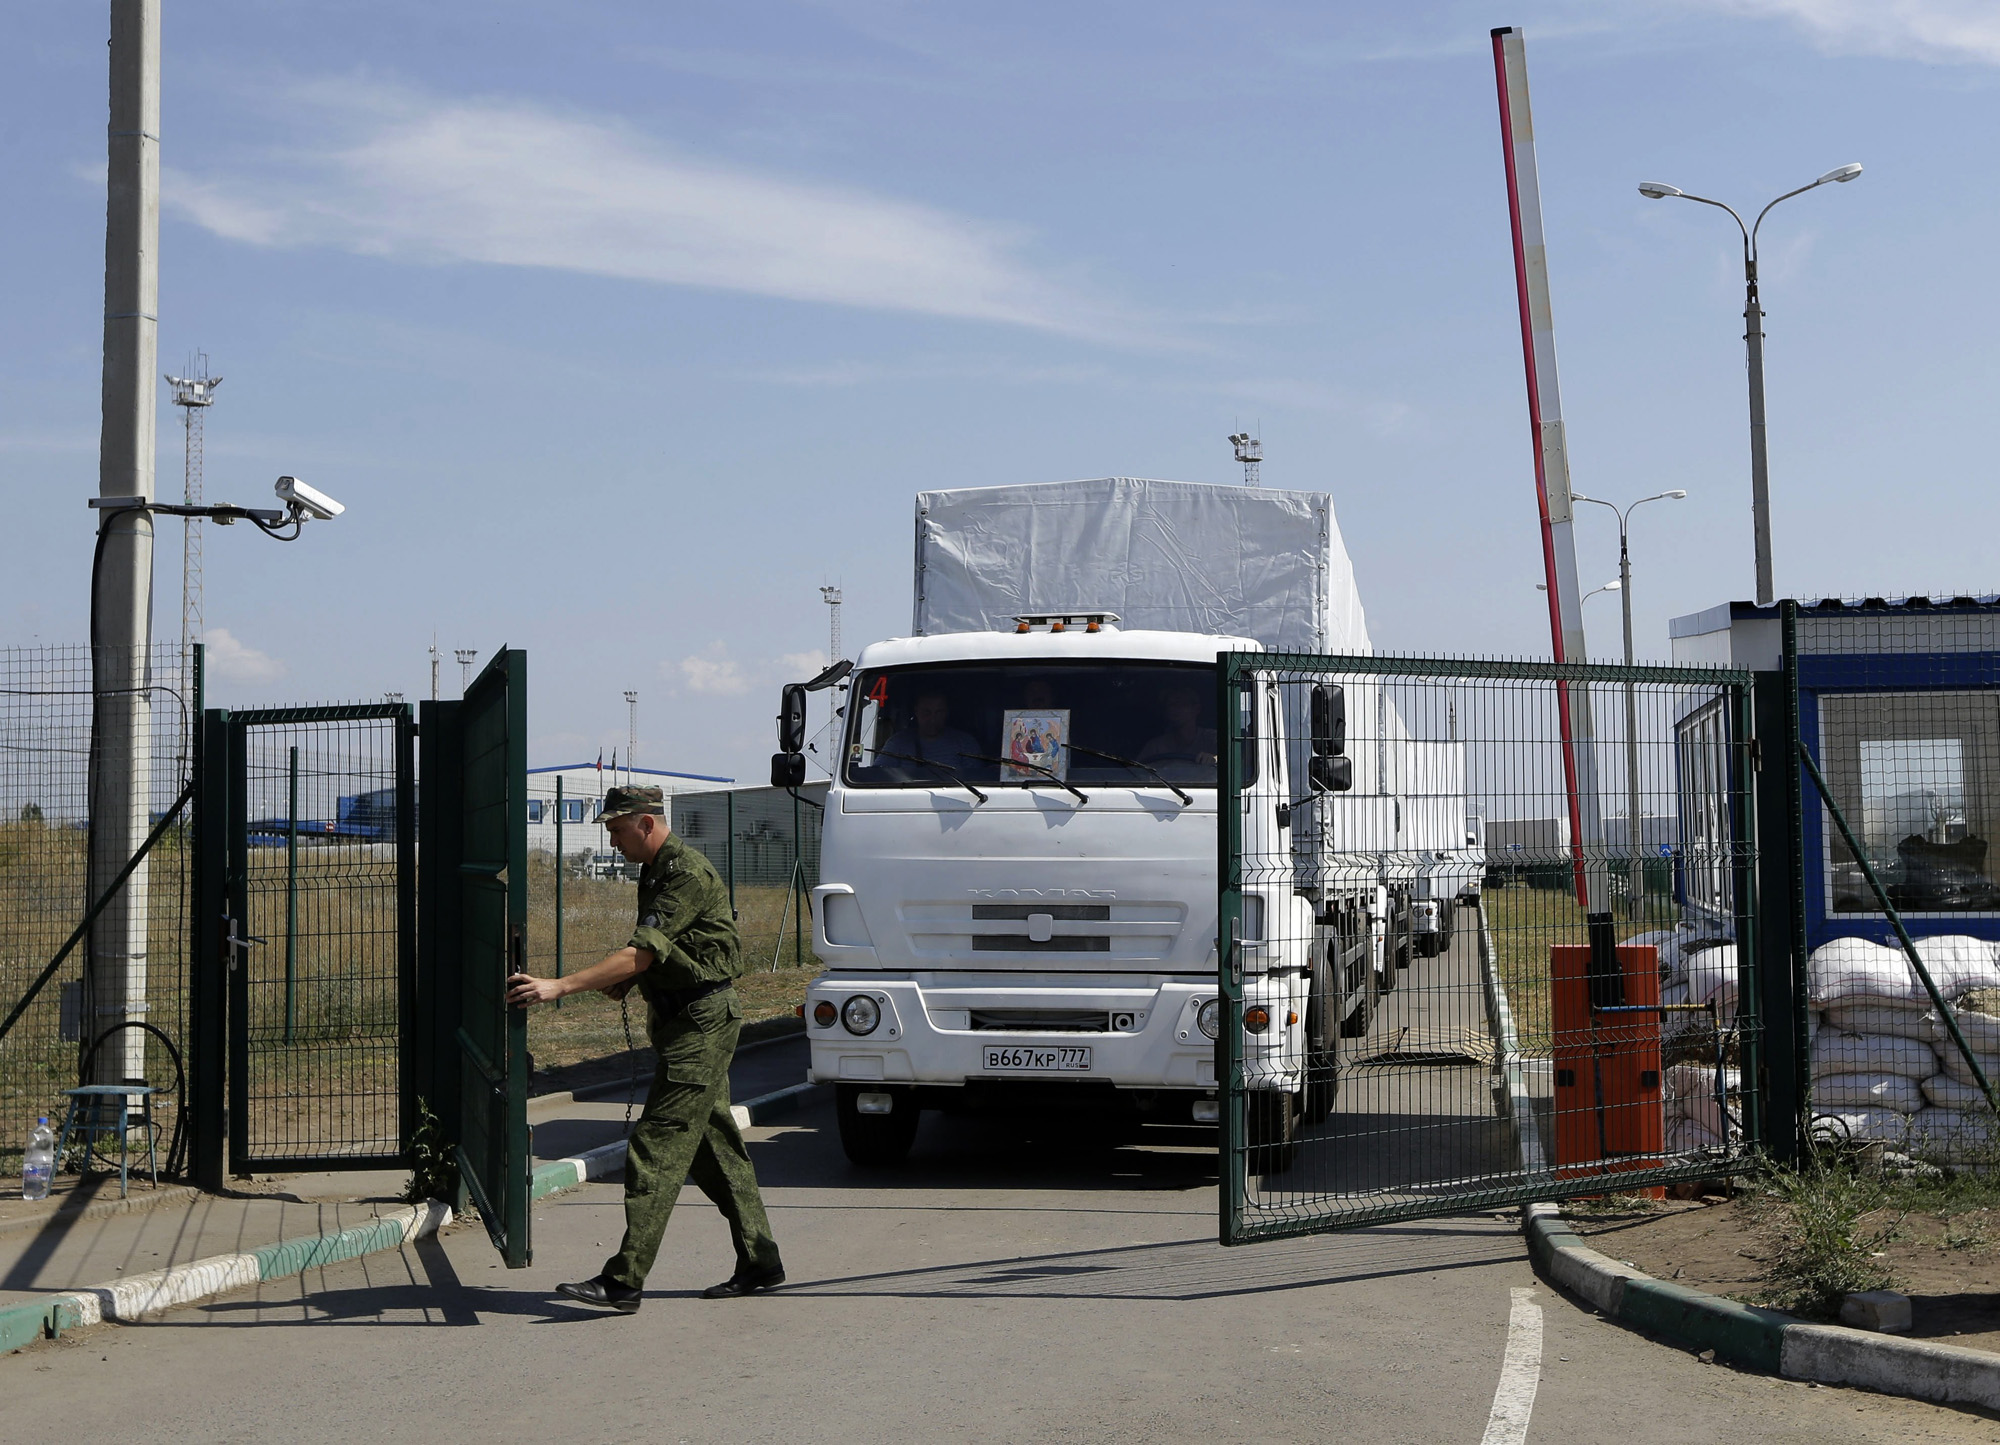 A Russian border guard opens a gate into the Ukraine for the first trucks heading into the country from the Russian town of Donetsk, Rostov-on-Don region, Russia, Aug. 22, 2014.